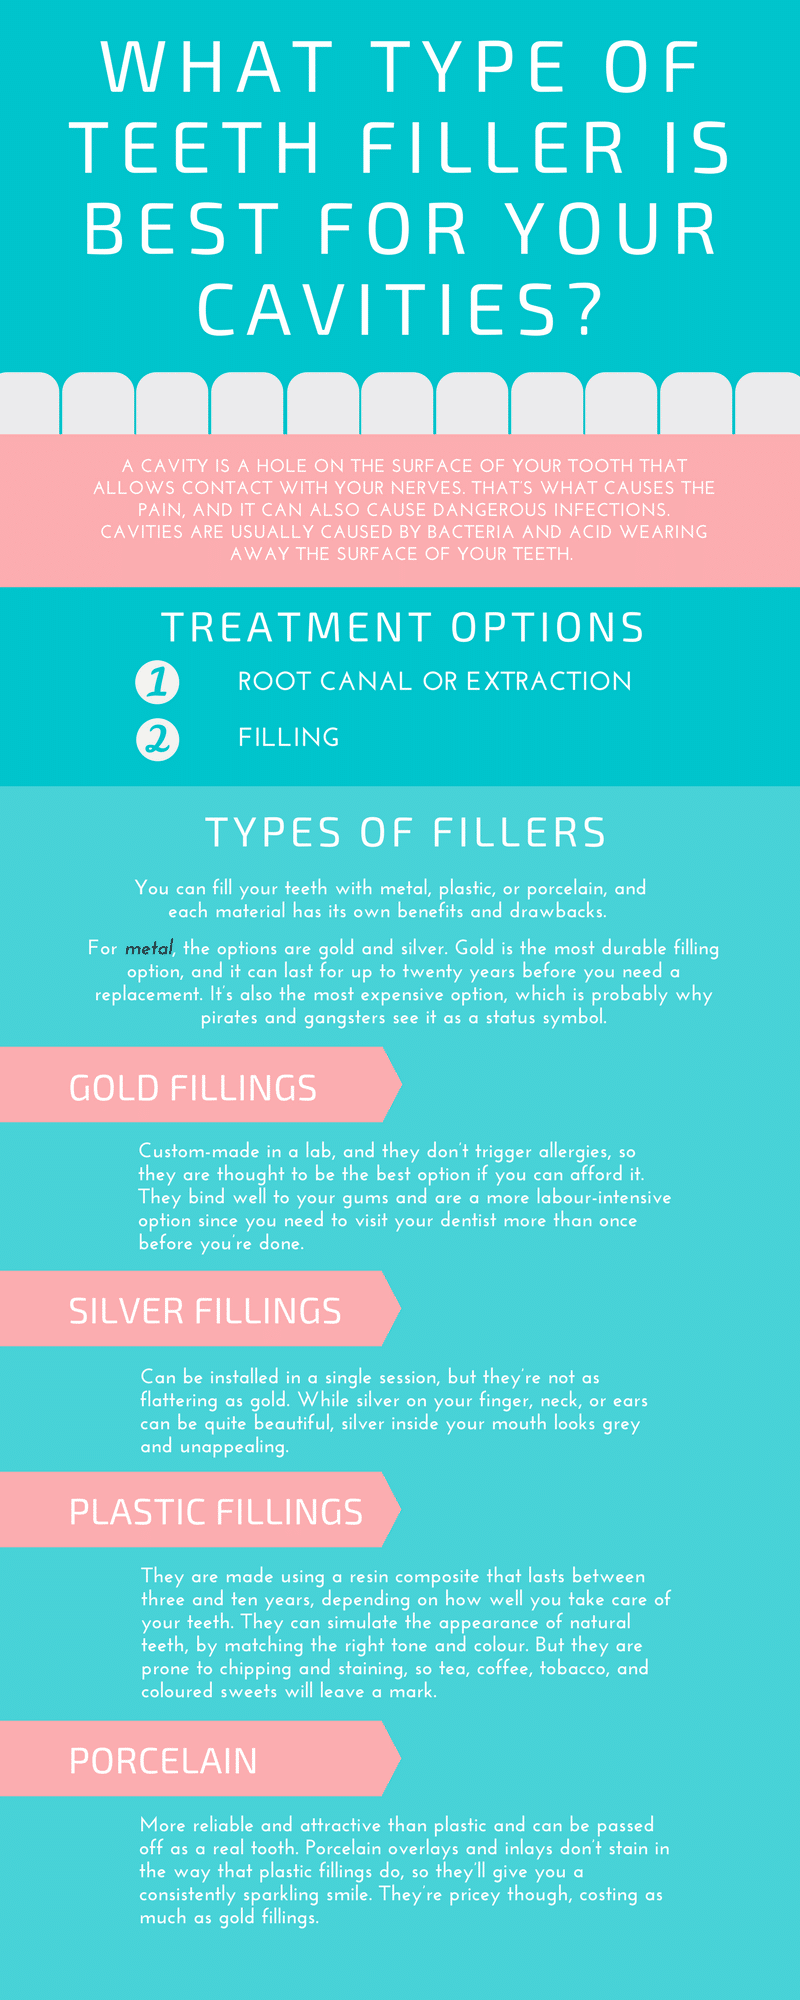 What type of teeth fillers are best for your cavities